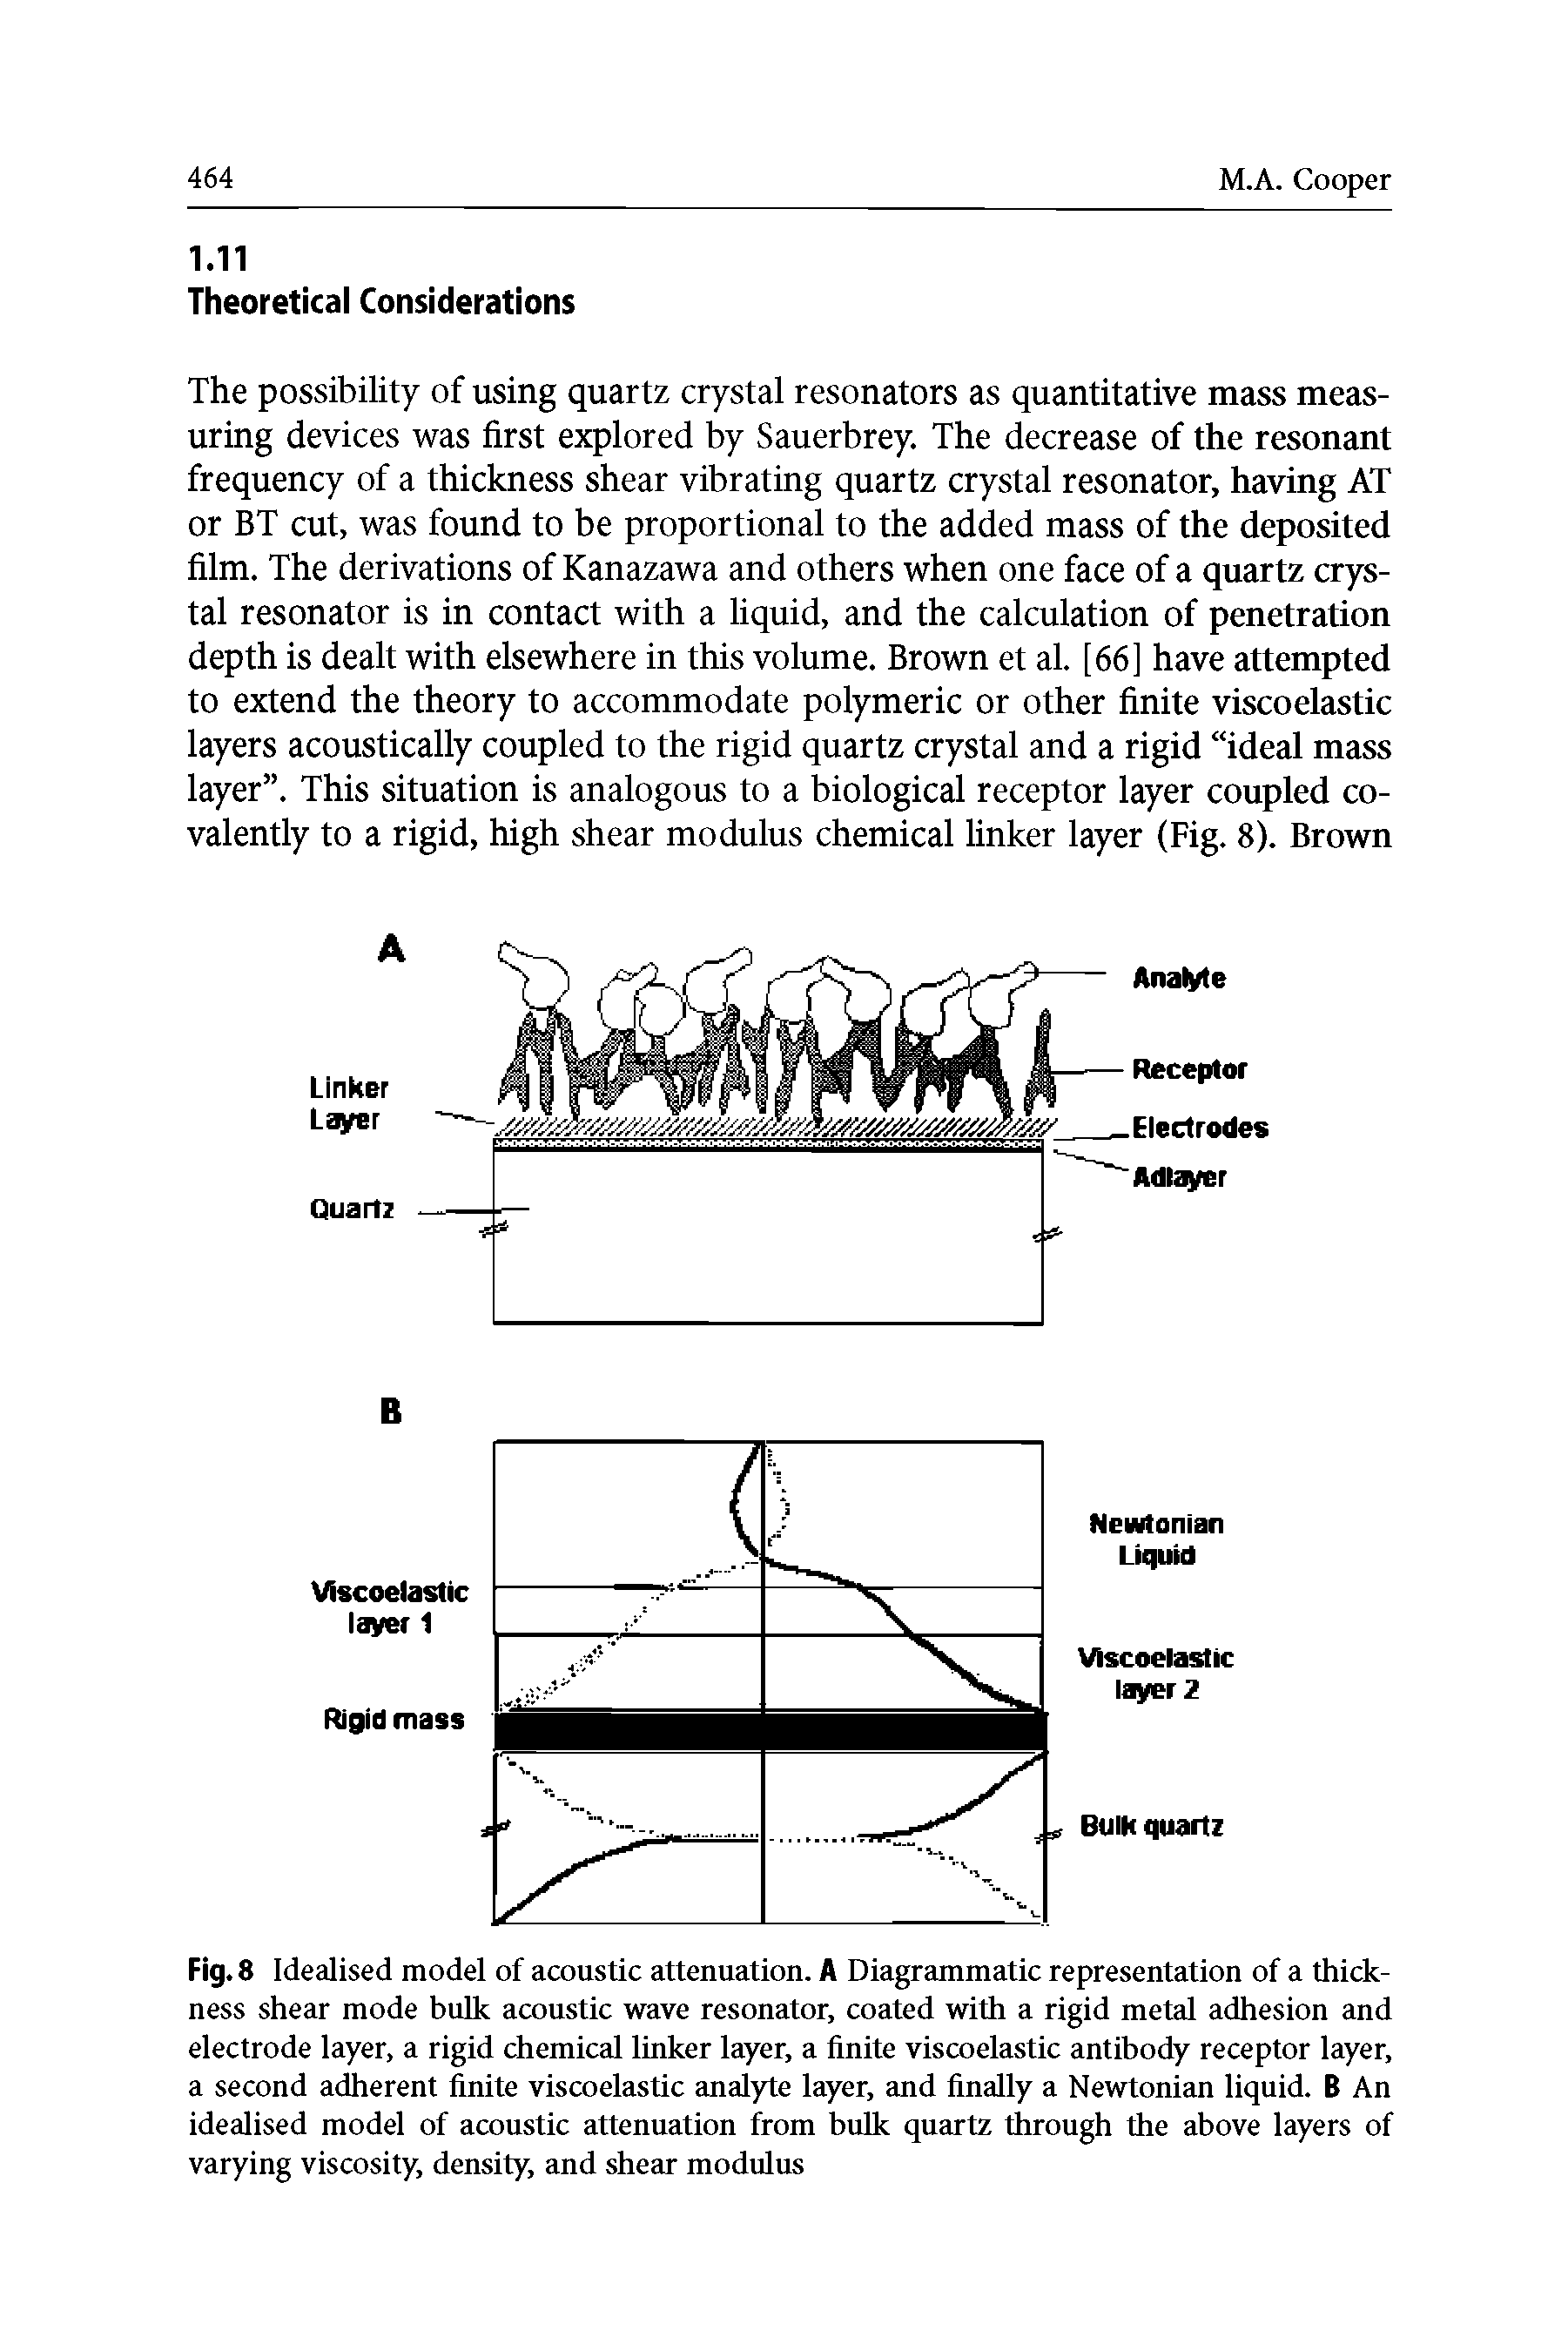 Fig. 8 Idealised model of acoustic attenuation. A Diagrammatic representation of a thickness shear mode bulk acoustic wave resonator, coated with a rigid metal adhesion and electrode layer, a rigid chemical linker layer, a finite viscoelastic antibody receptor layer, a second adherent finite viscoelastic analyte layer, and finally a Newtonian liquid. B An idealised model of acoustic attenuation from bulk quartz through the above layers of varying viscosity, density, and shear modulus...